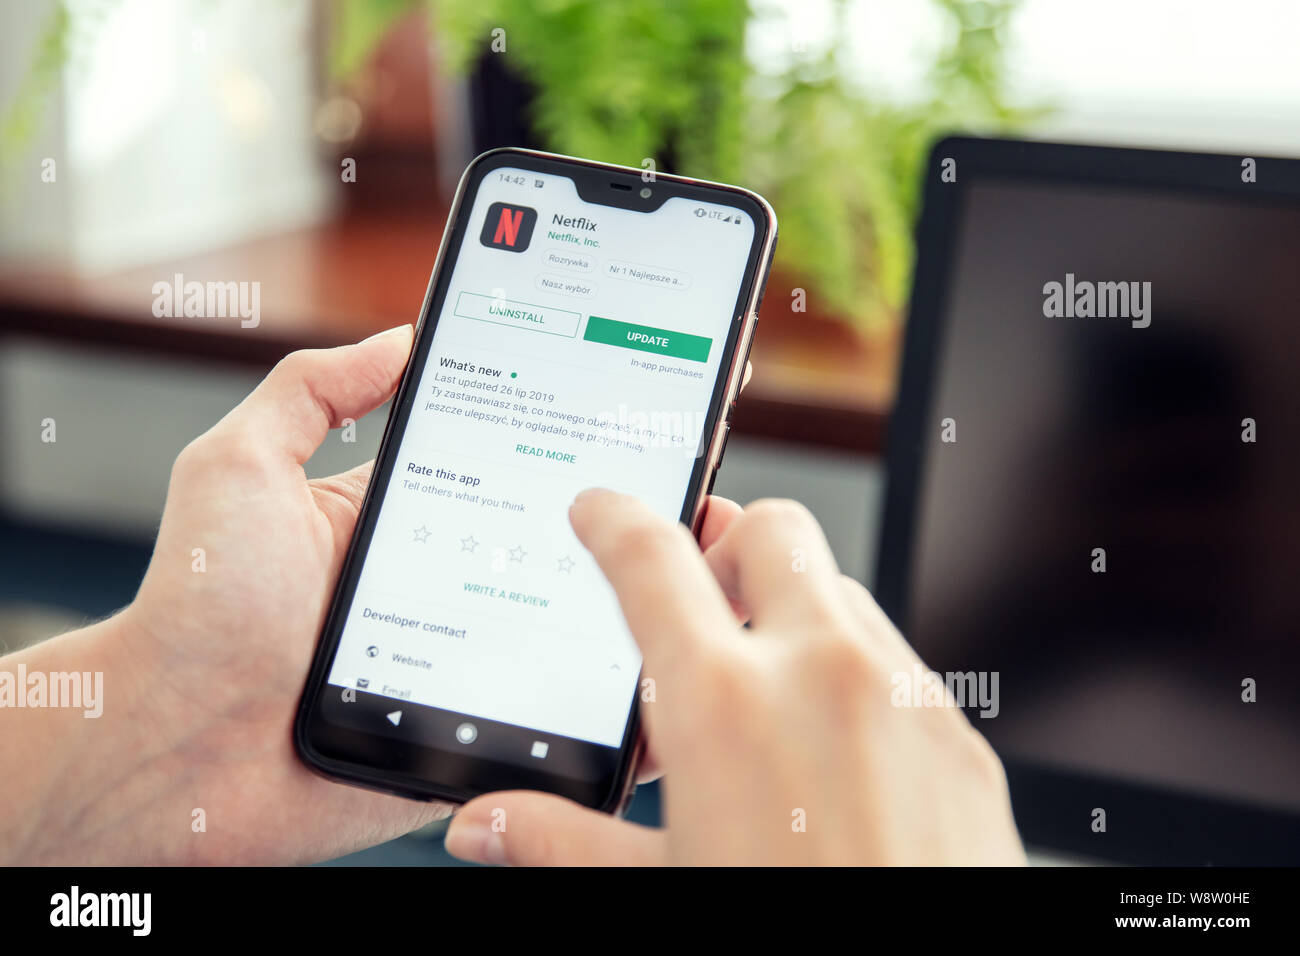 WROCLAW, POLAND - JULY 31th, 2019: Woman installs Netflix application on the Xiaomi A2 smartphone. Netflix is an American media-services provider whic Stock Photo